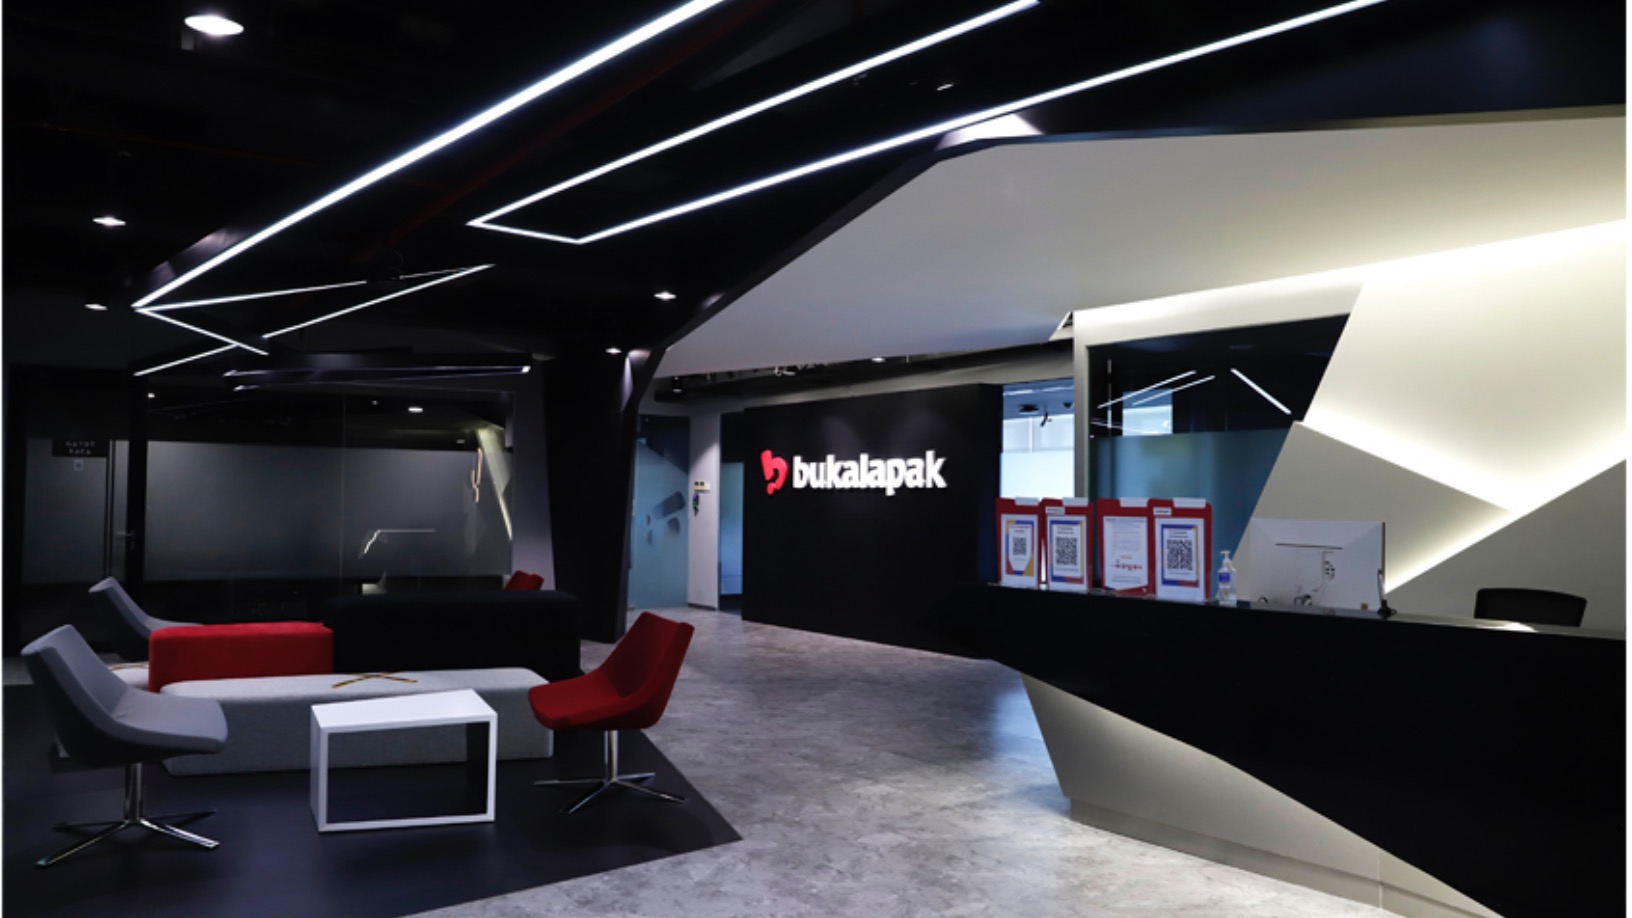 Bukalapak to raise IDR 21tn in Indonesia's biggest IPO yet